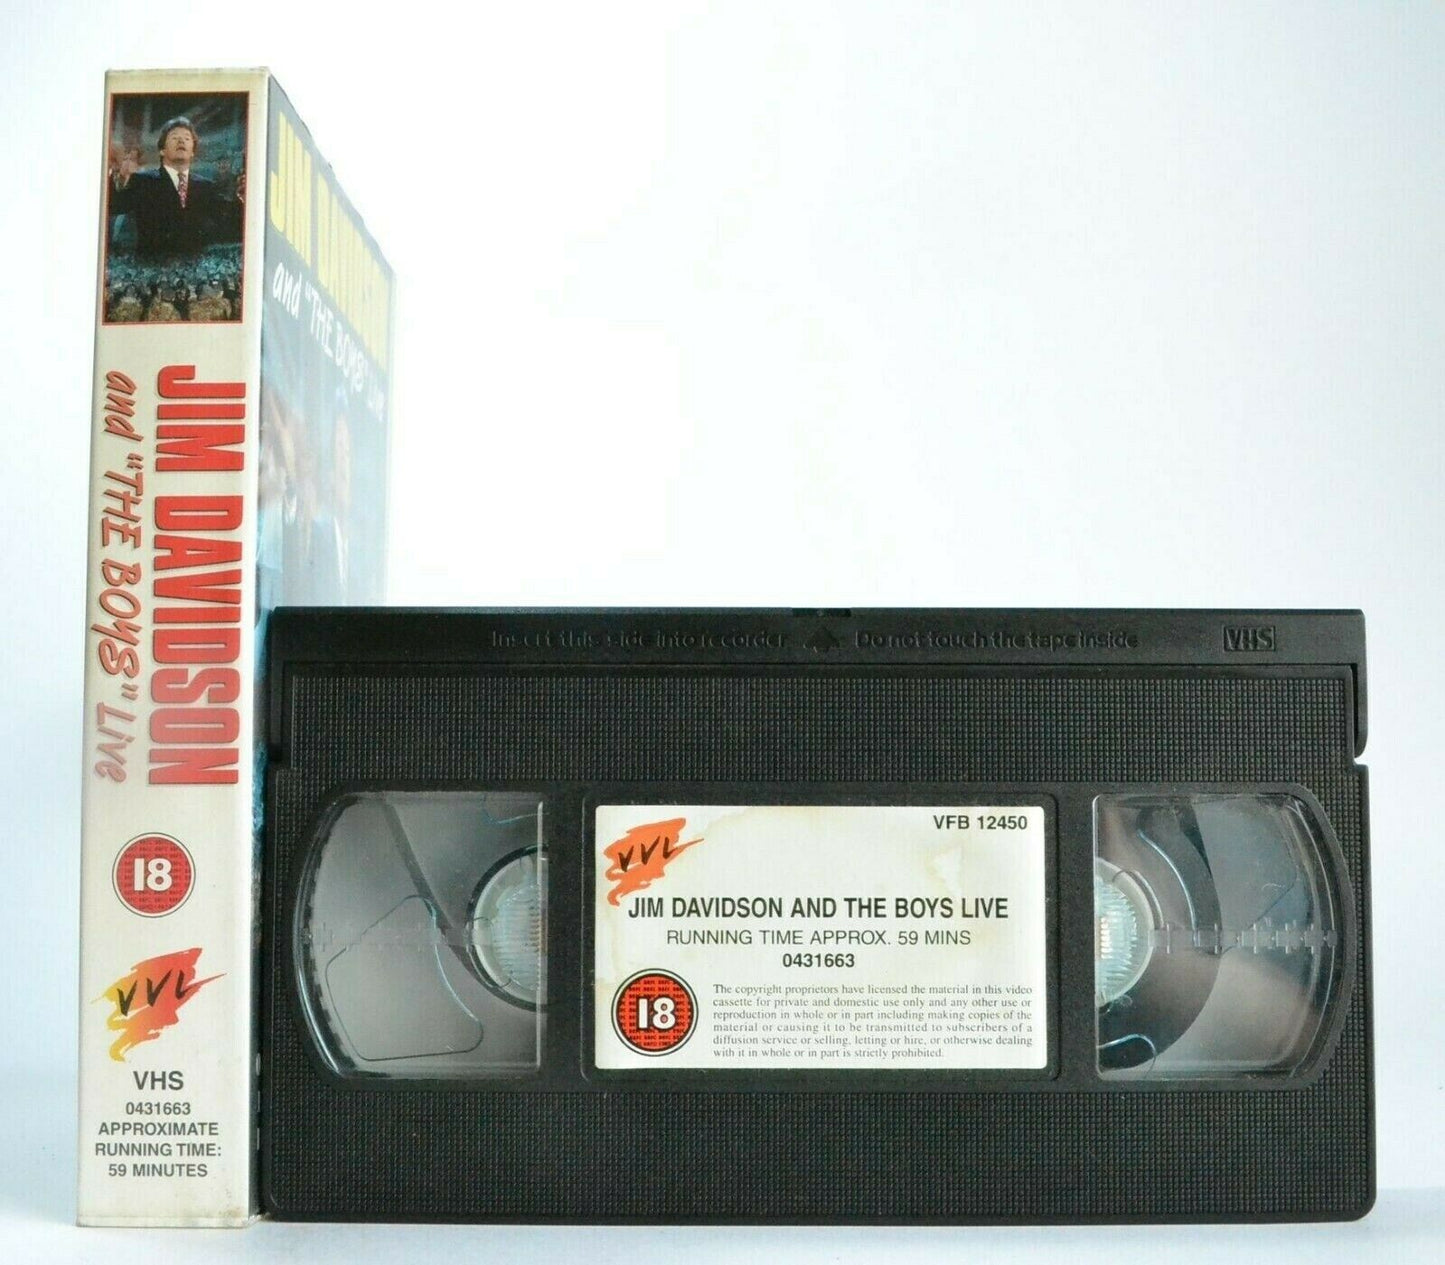 Jim Davidson And "The Boys" Live - 1996 August/Poland - Stand-Up - Comedy - VHS-